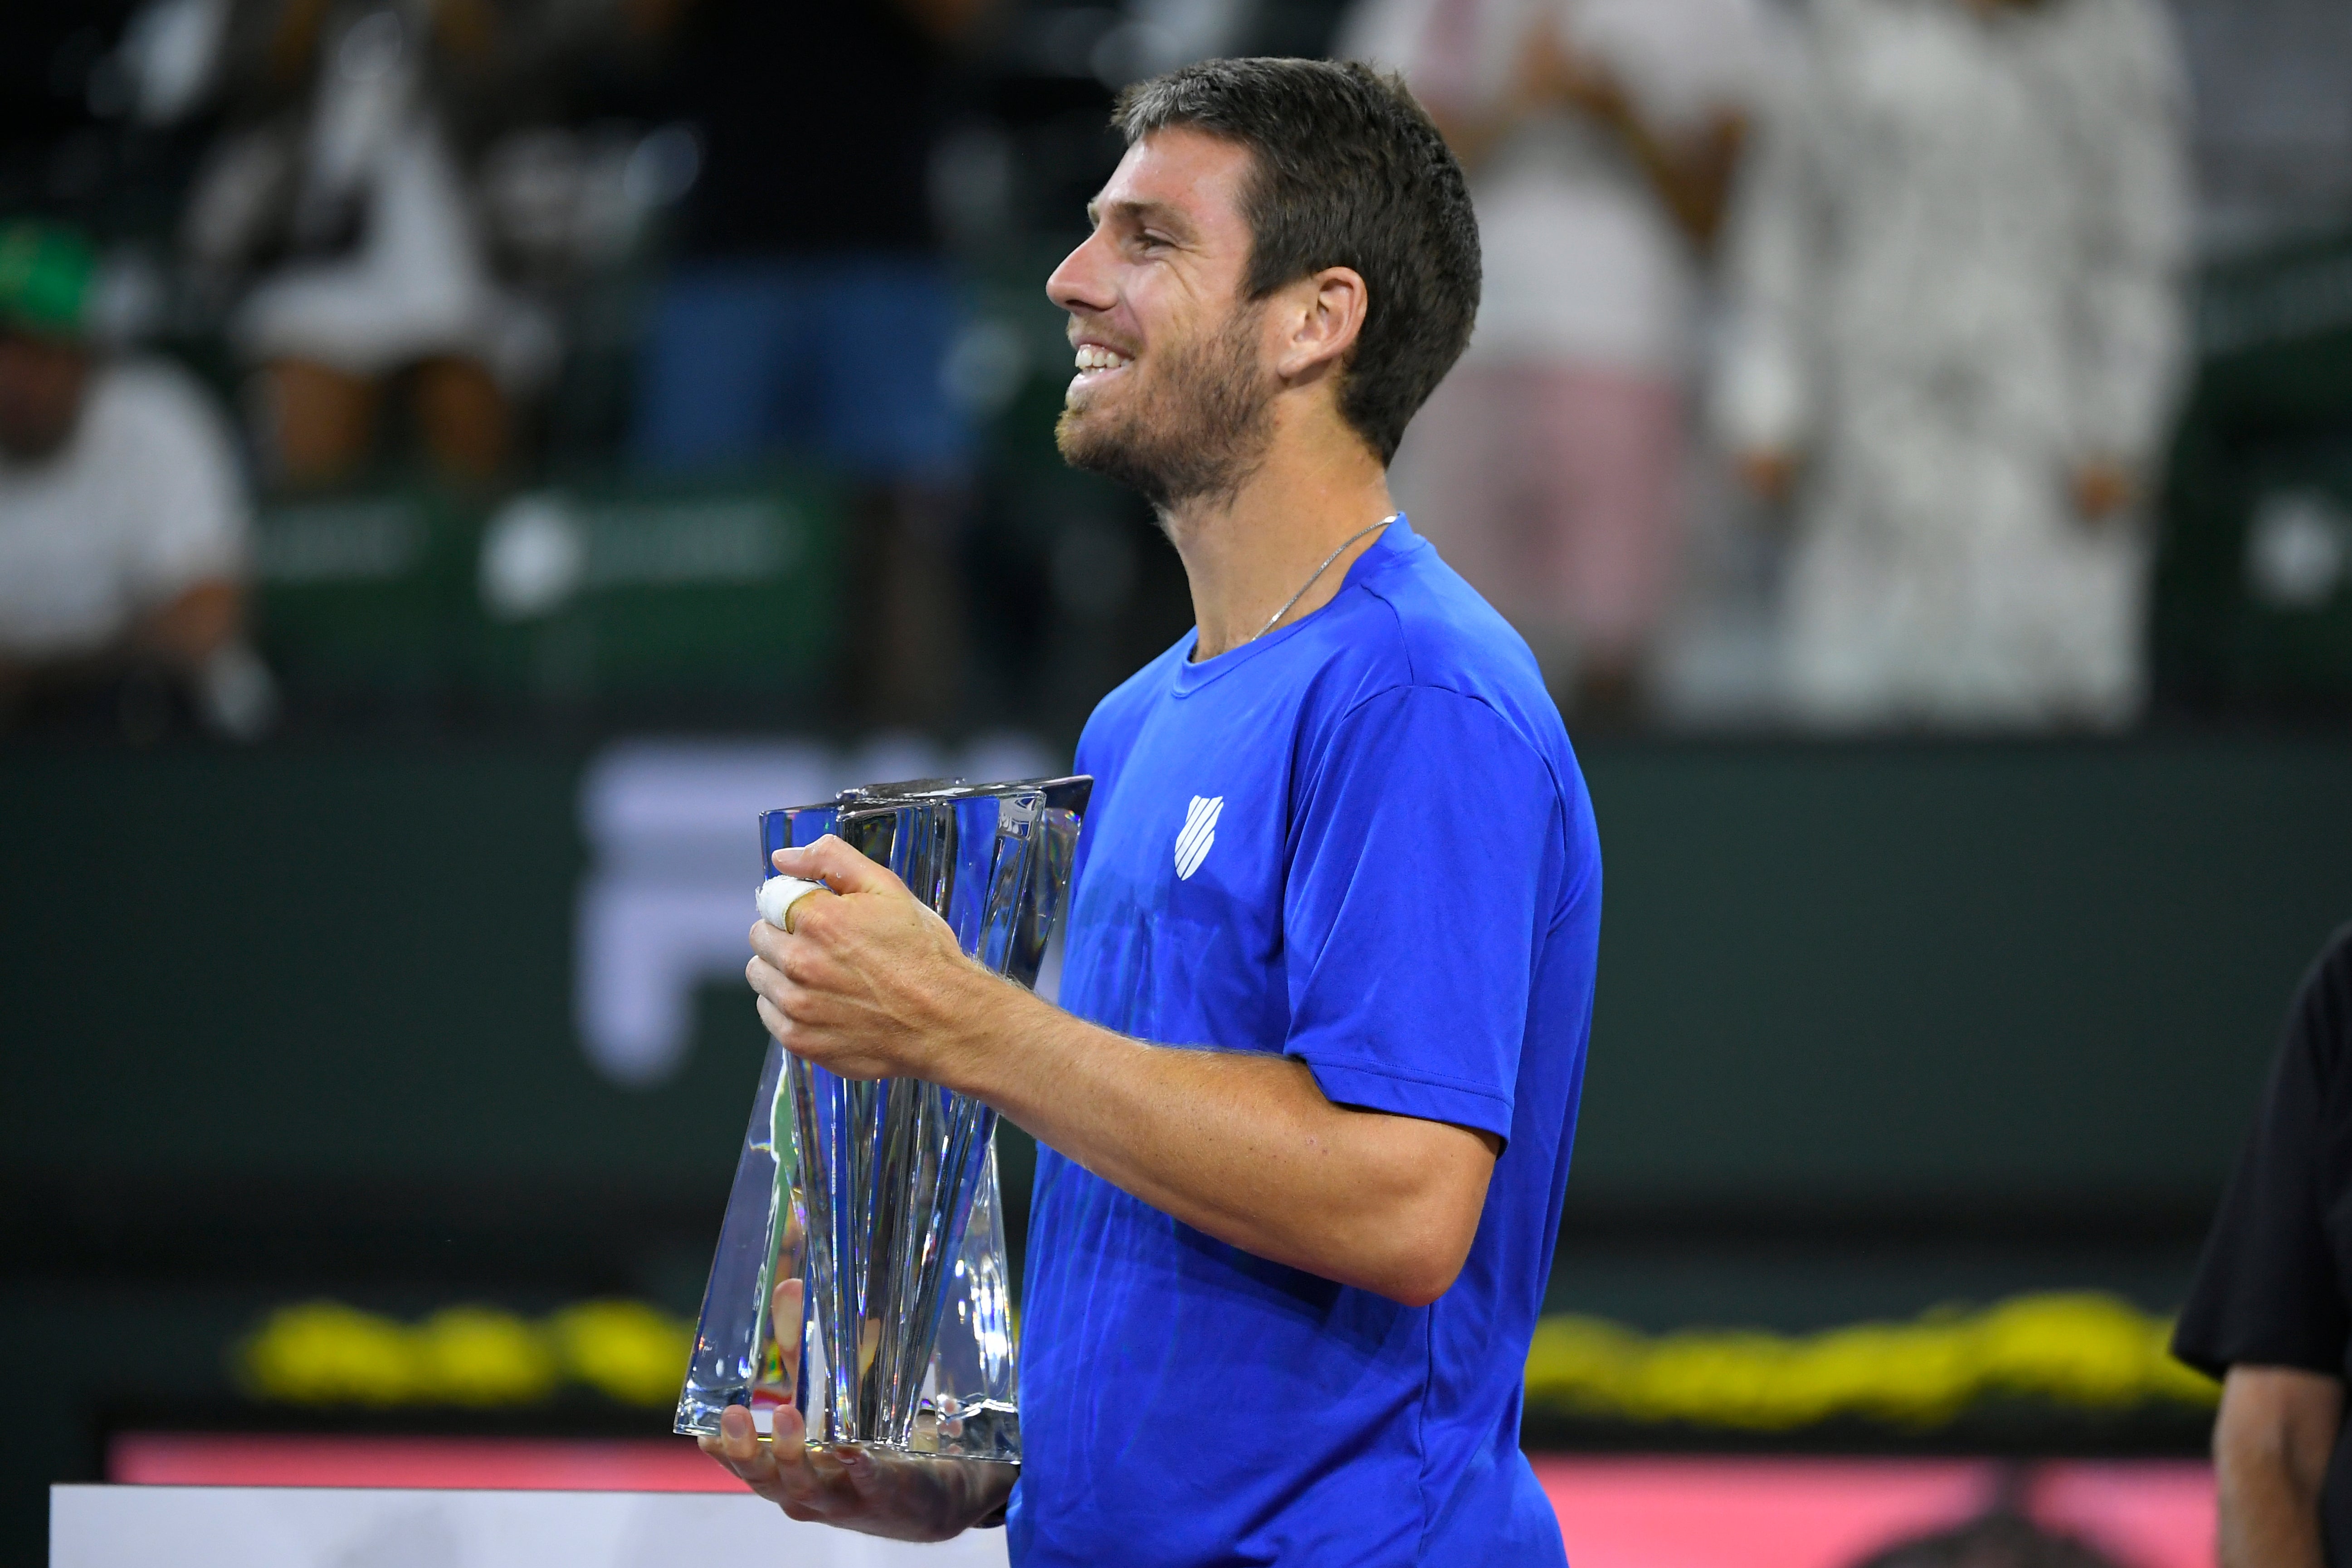 California dreaming: Norrie’s 3-6 6-4 6-1 victory earned him $1.2m and a world No 15 ranking